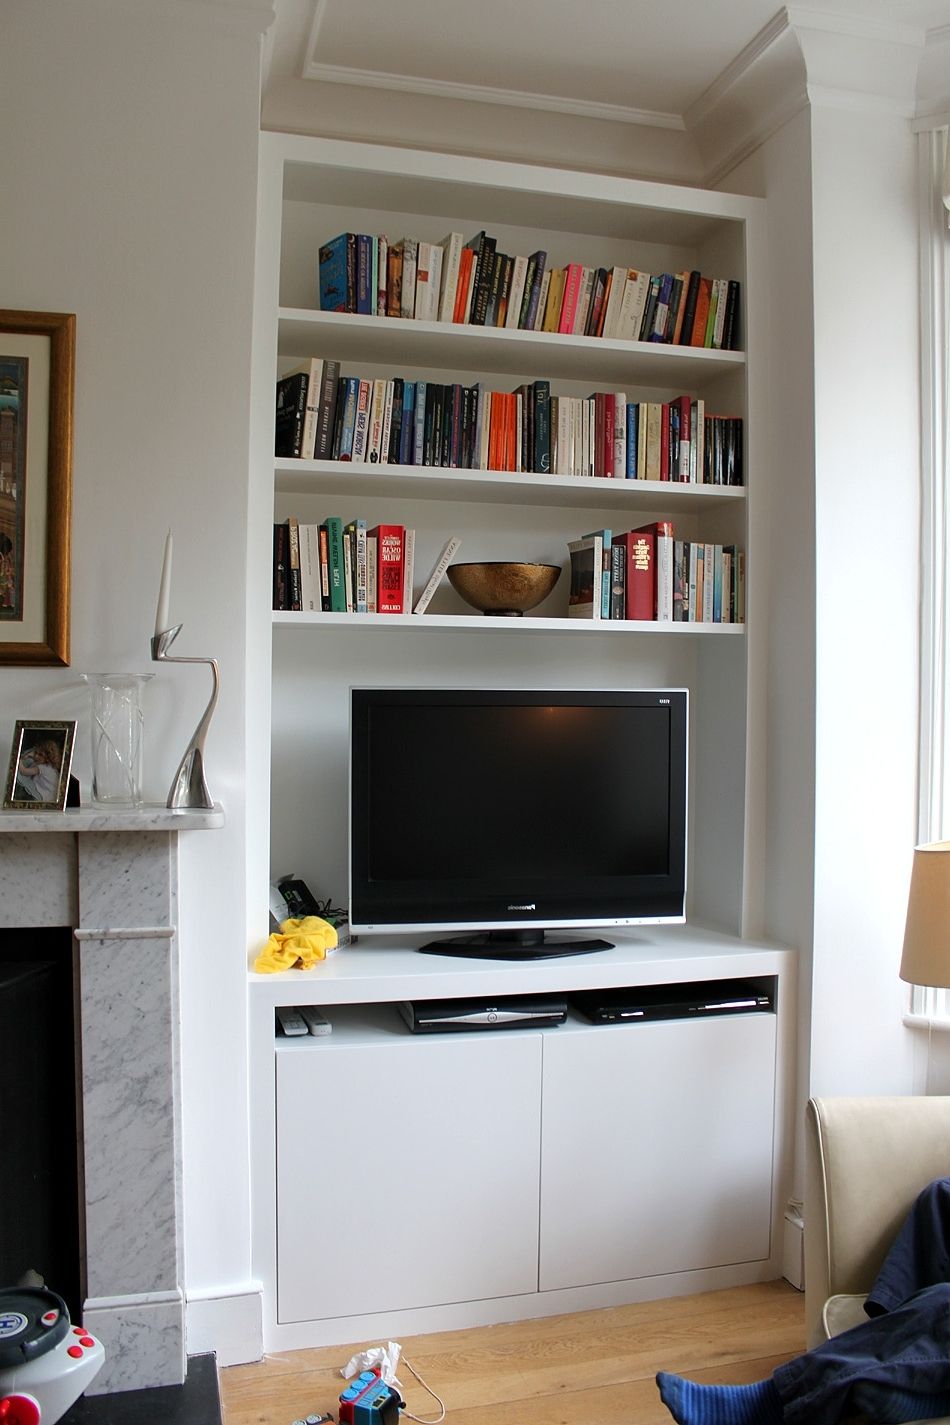 Well Known Bespoke Tv Cabinet Throughout Fitted Wardrobes, Bookcases, Shelving, Floating Shelves, London (View 11 of 15)